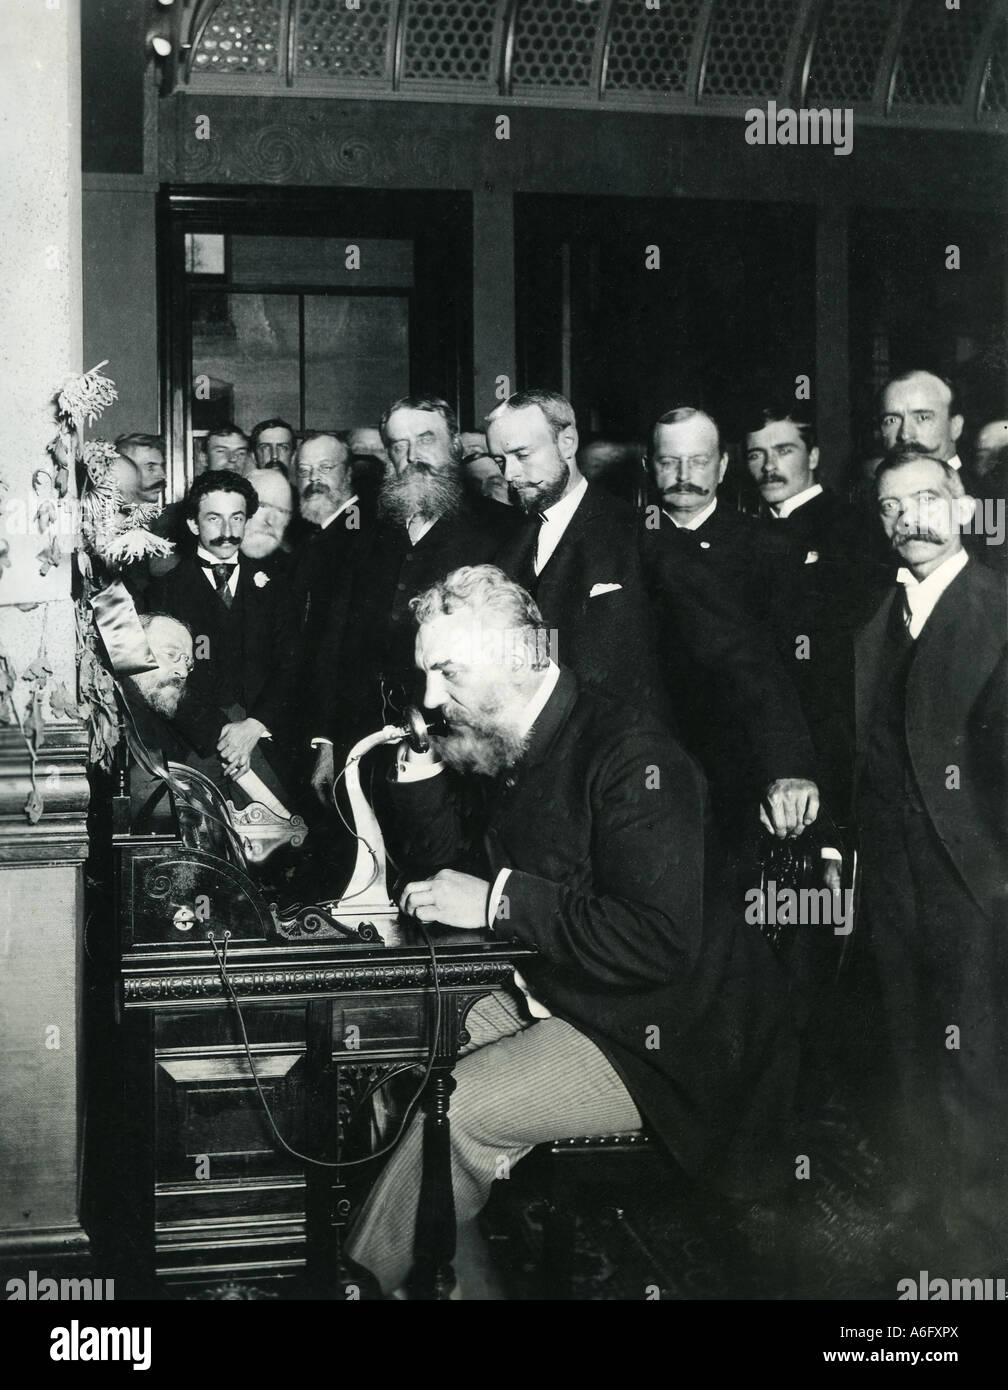 ALEXANDER GRAHAM BELL in New York in 1892 demonstrating making a telephone call to Chicago Stock Photo